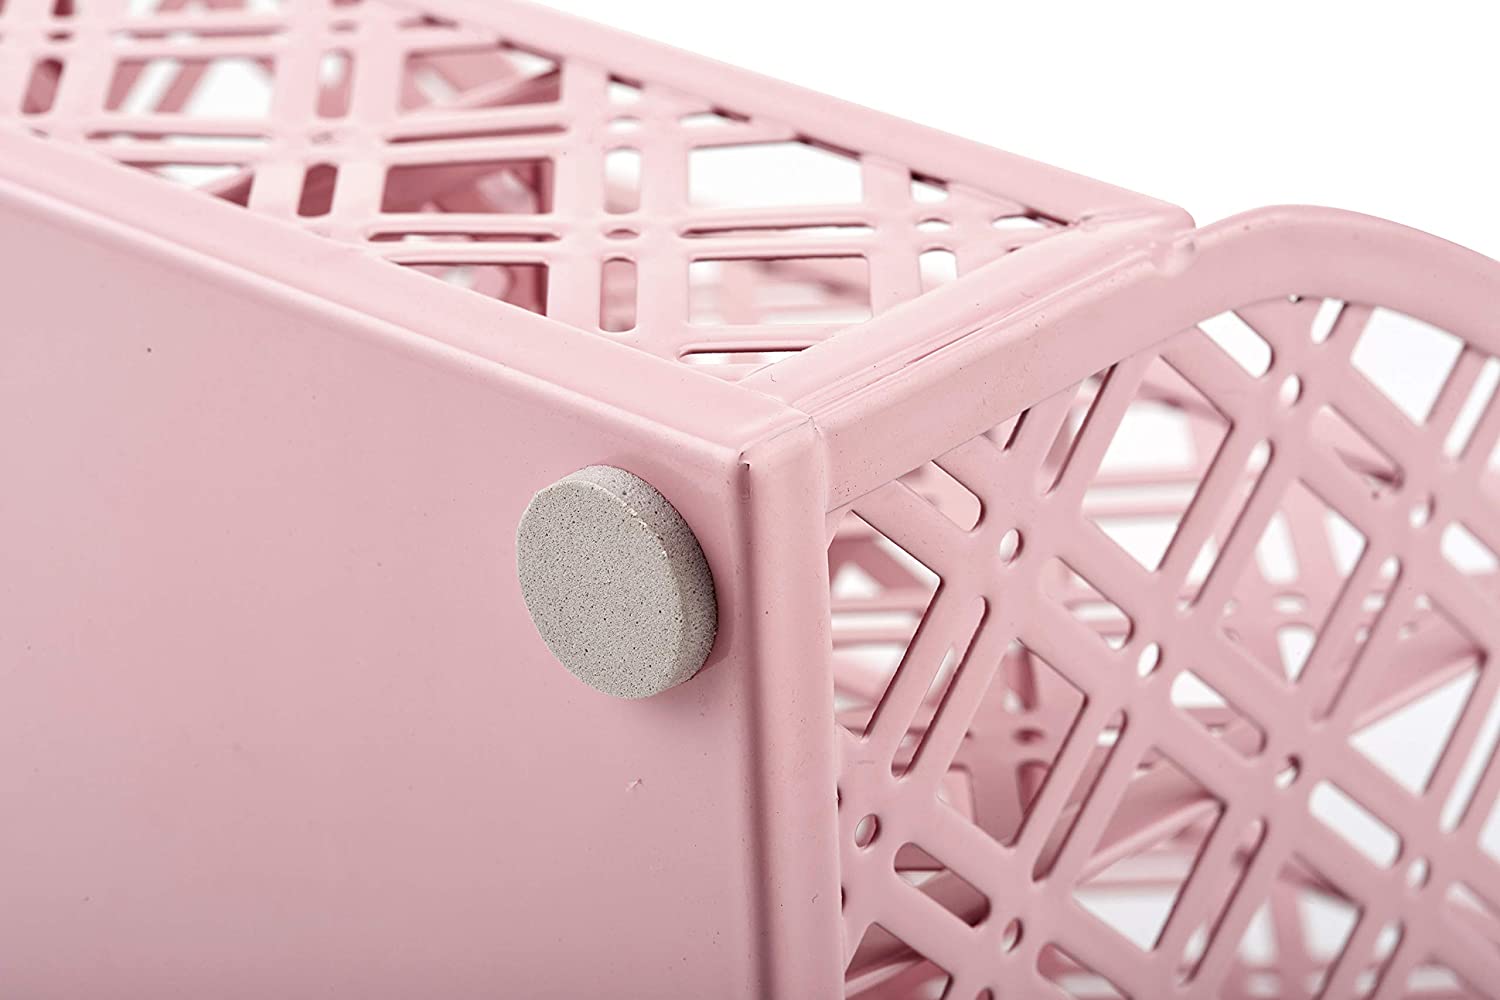 EXERZ Desk Organiser with 7 Compartments -Mesh Desk Tidy Caddy  - Light Pink